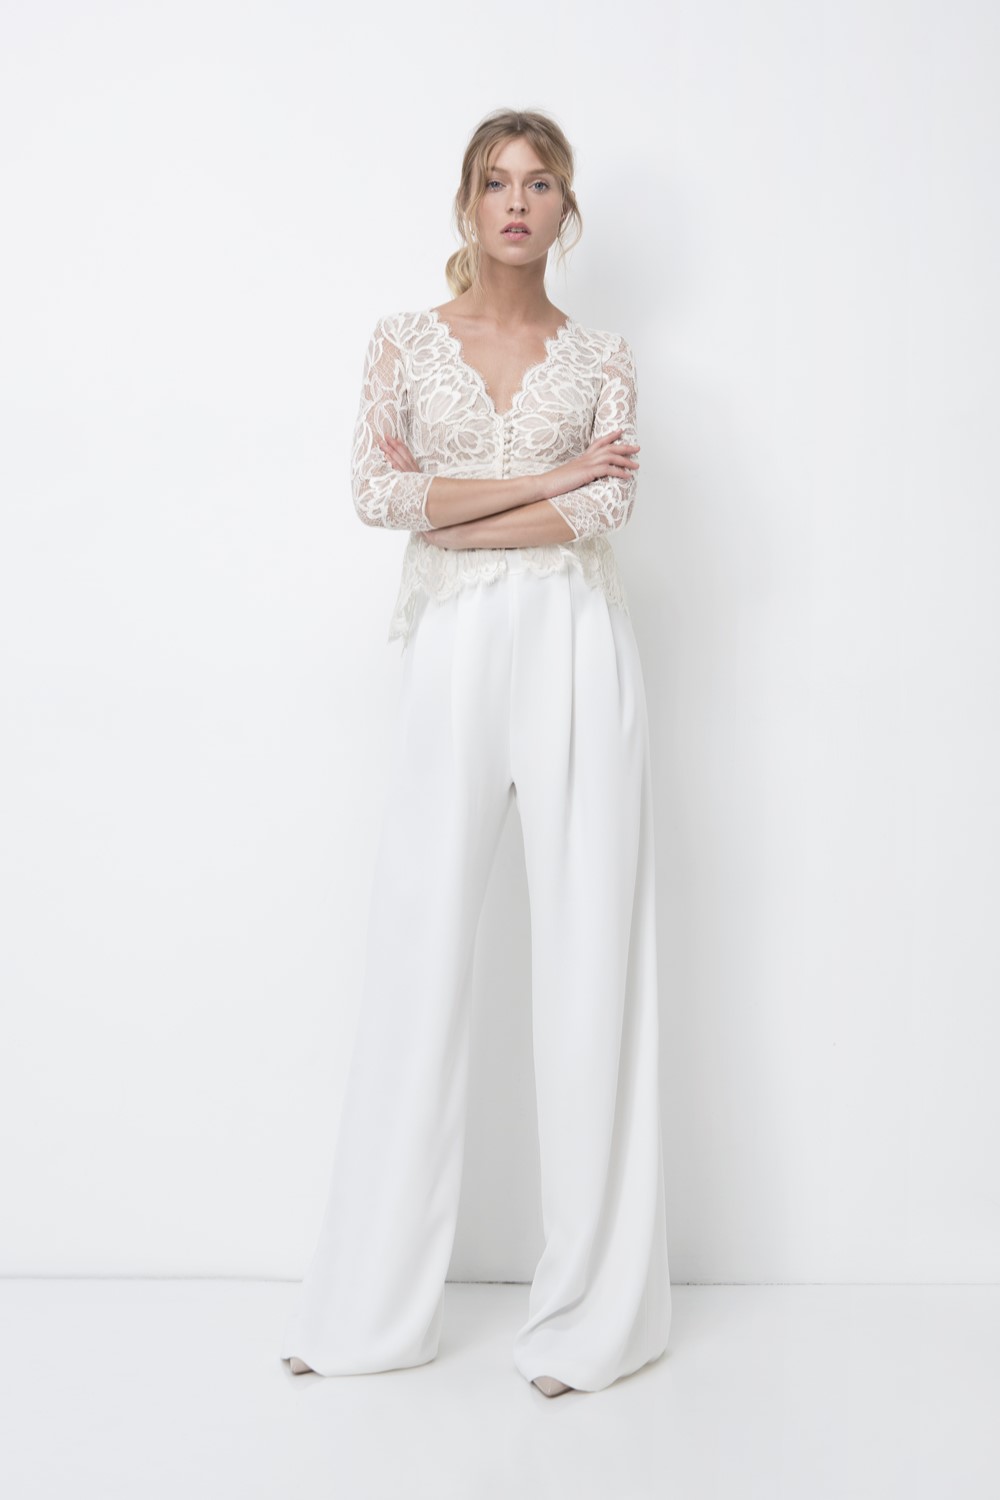 Eve Bridal Trousers from Lihi Hod's 2018 Bridal Collection